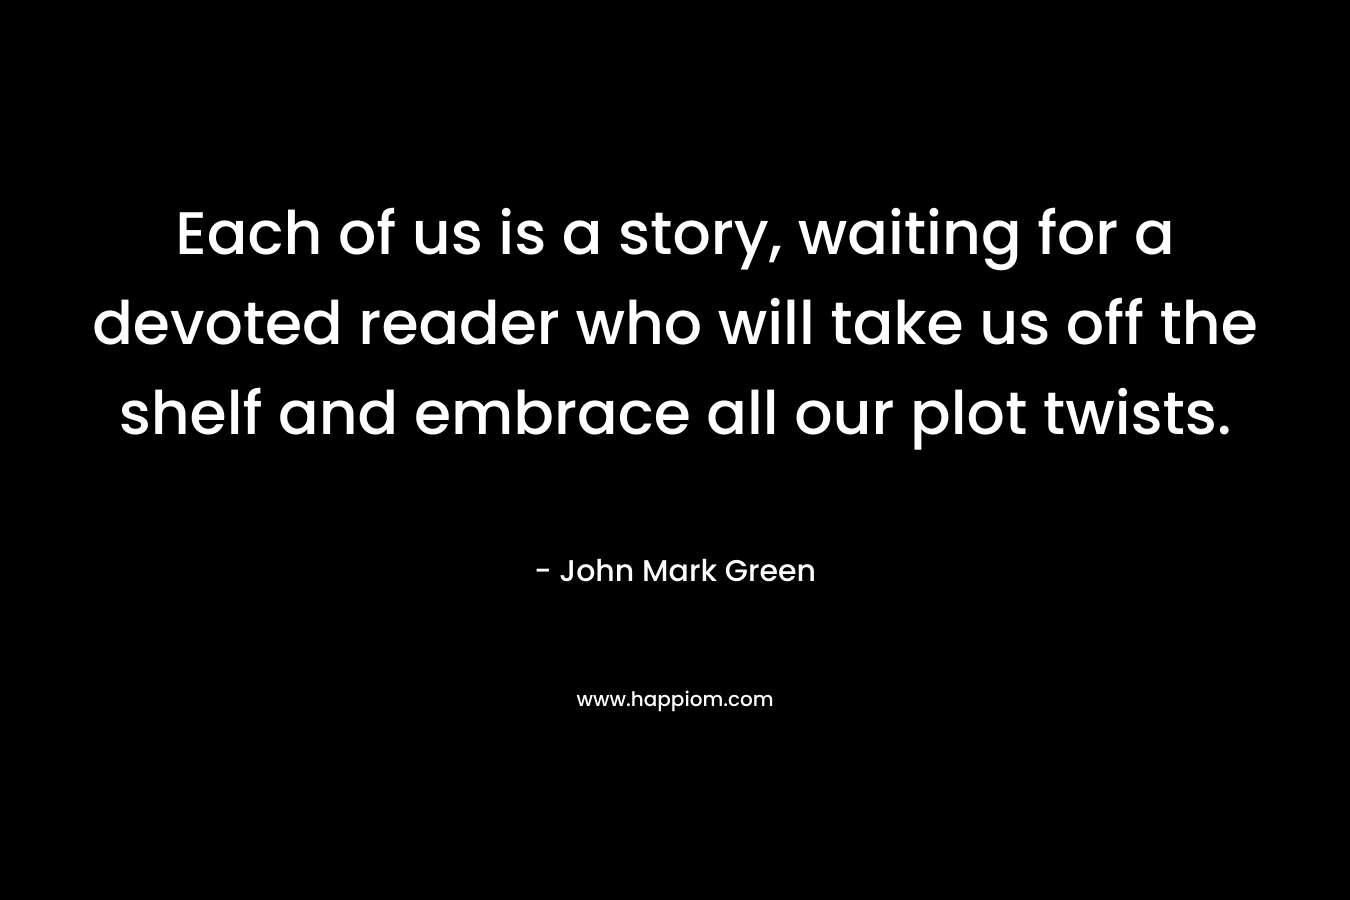 Each of us is a story, waiting for a devoted reader who will take us off the shelf and embrace all our plot twists.